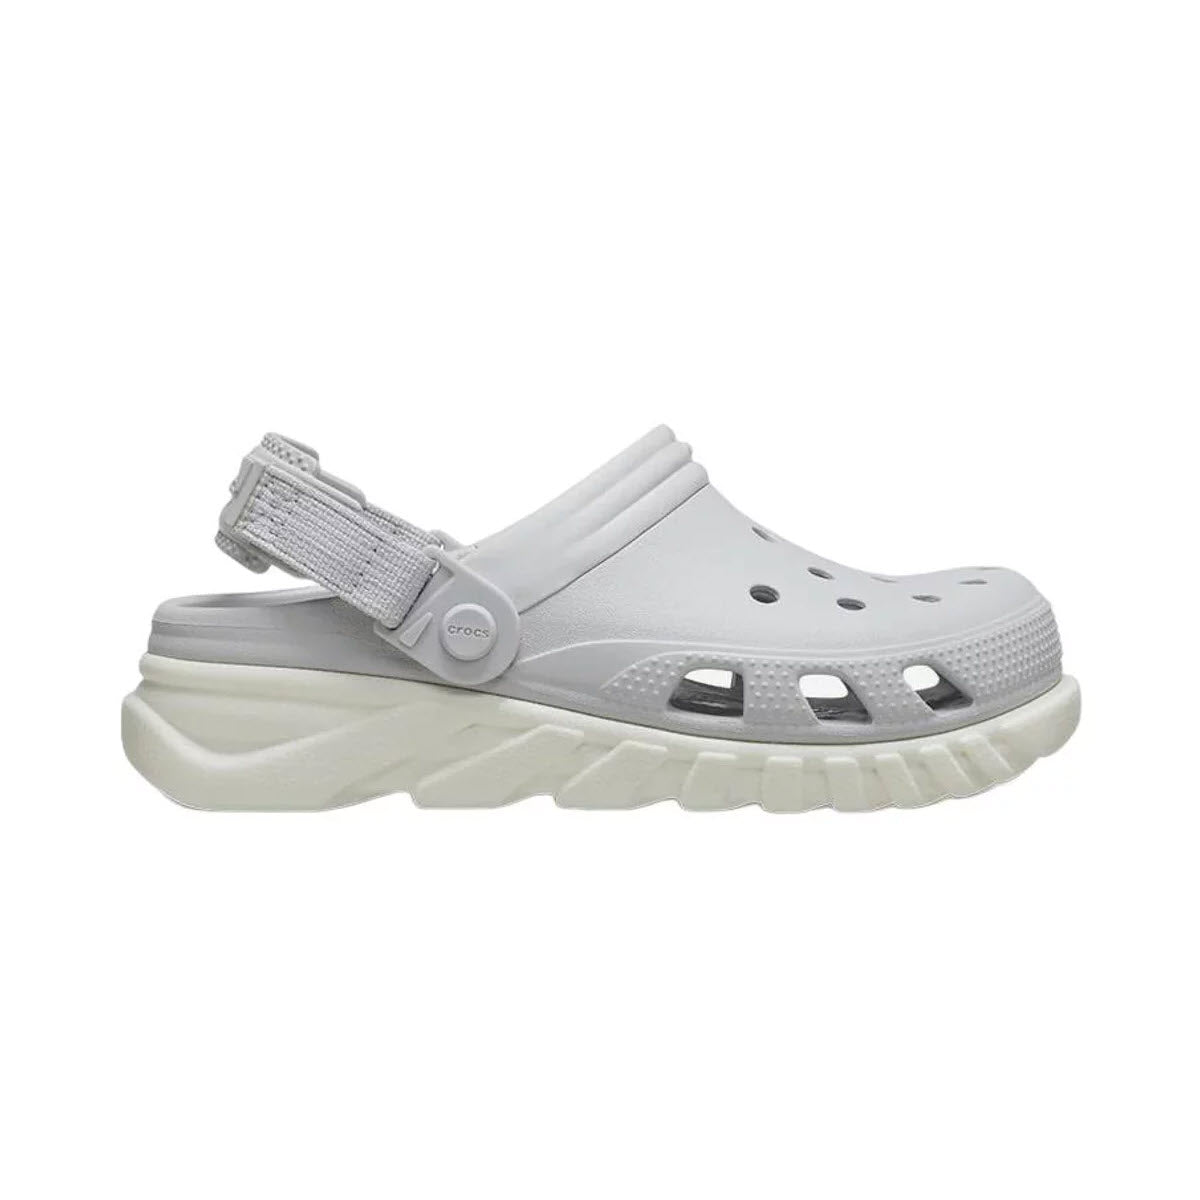 Crocs Duet Max II Clog Atmosphere - Mens in light gray with adjustable back straps and chunky sole, isolated on a white background.